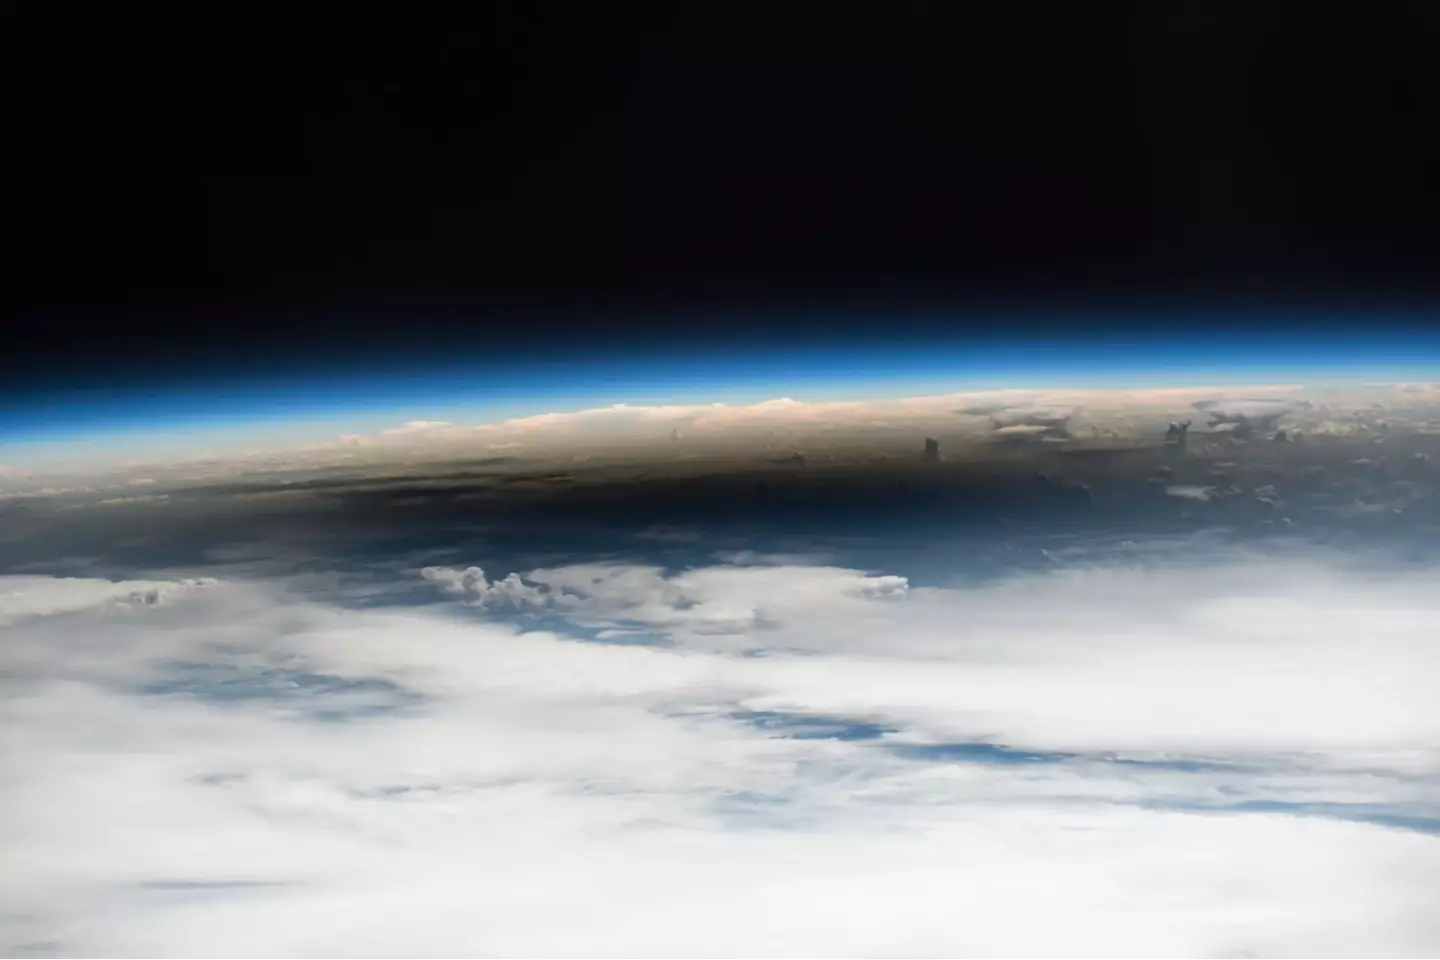 The view of a solar eclipse from space. NASA/JSC